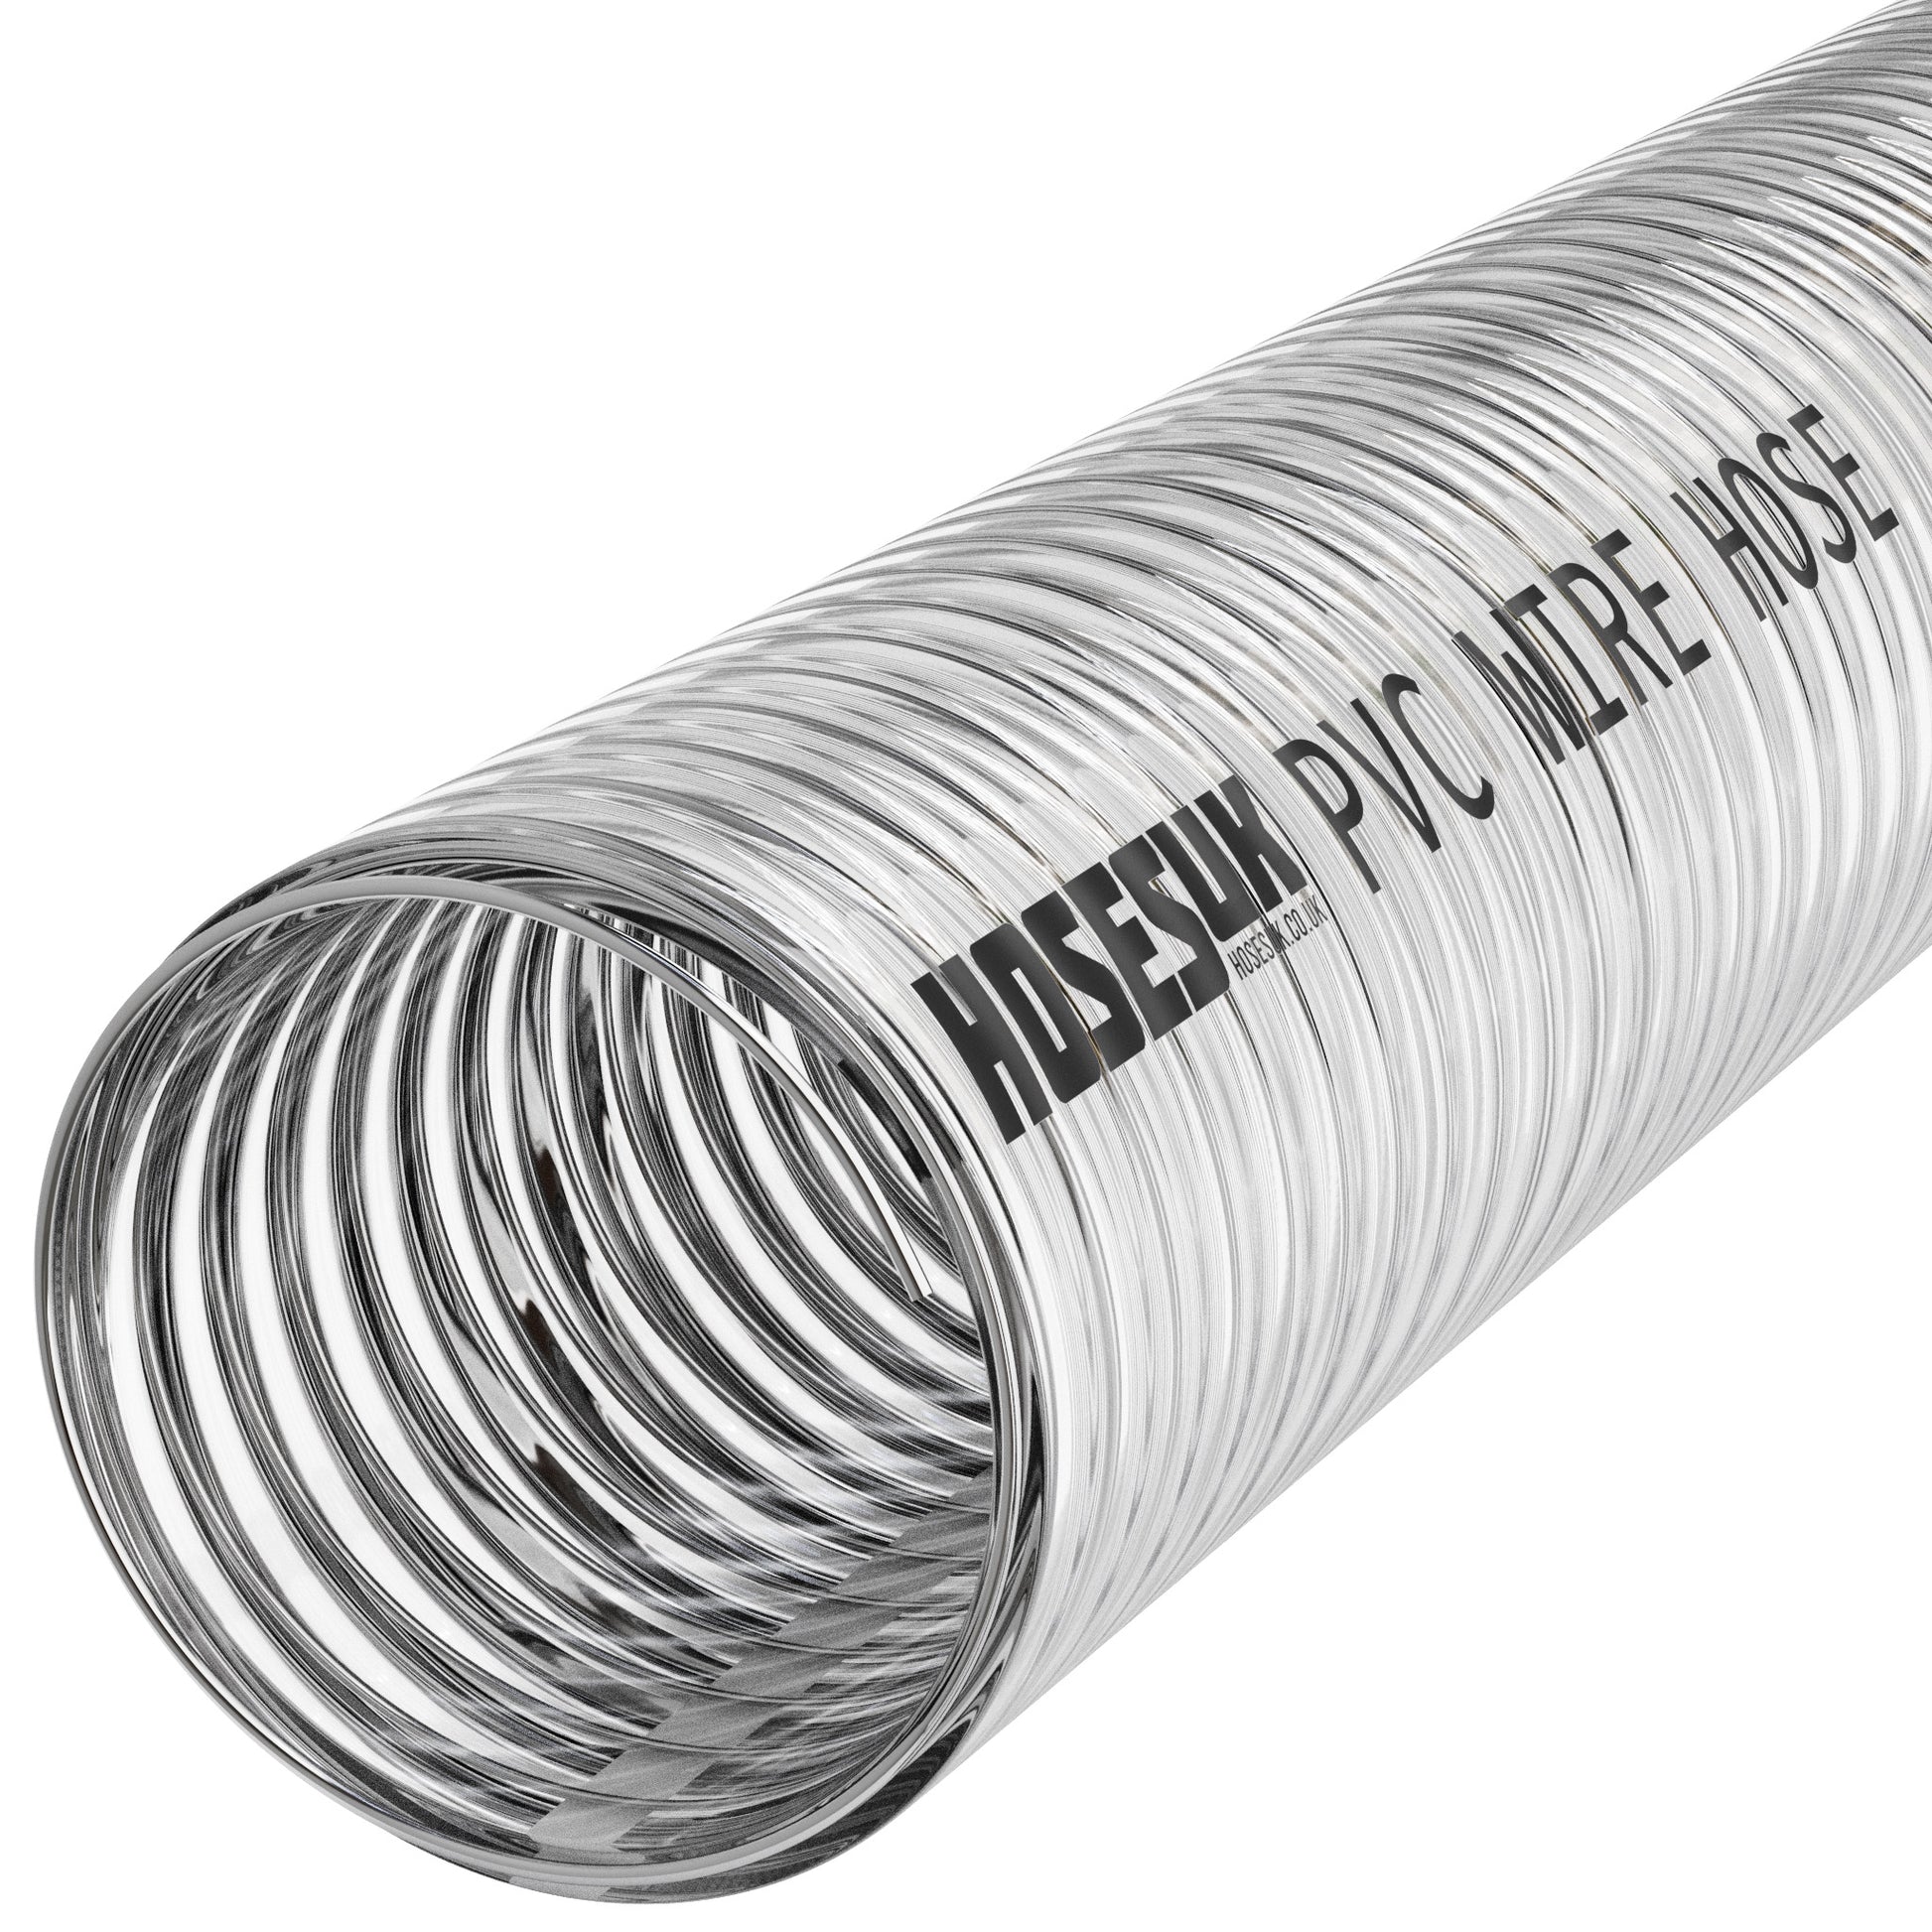 25mm ID PVC Wire Reinforced Clear Hose  Hoses UK   